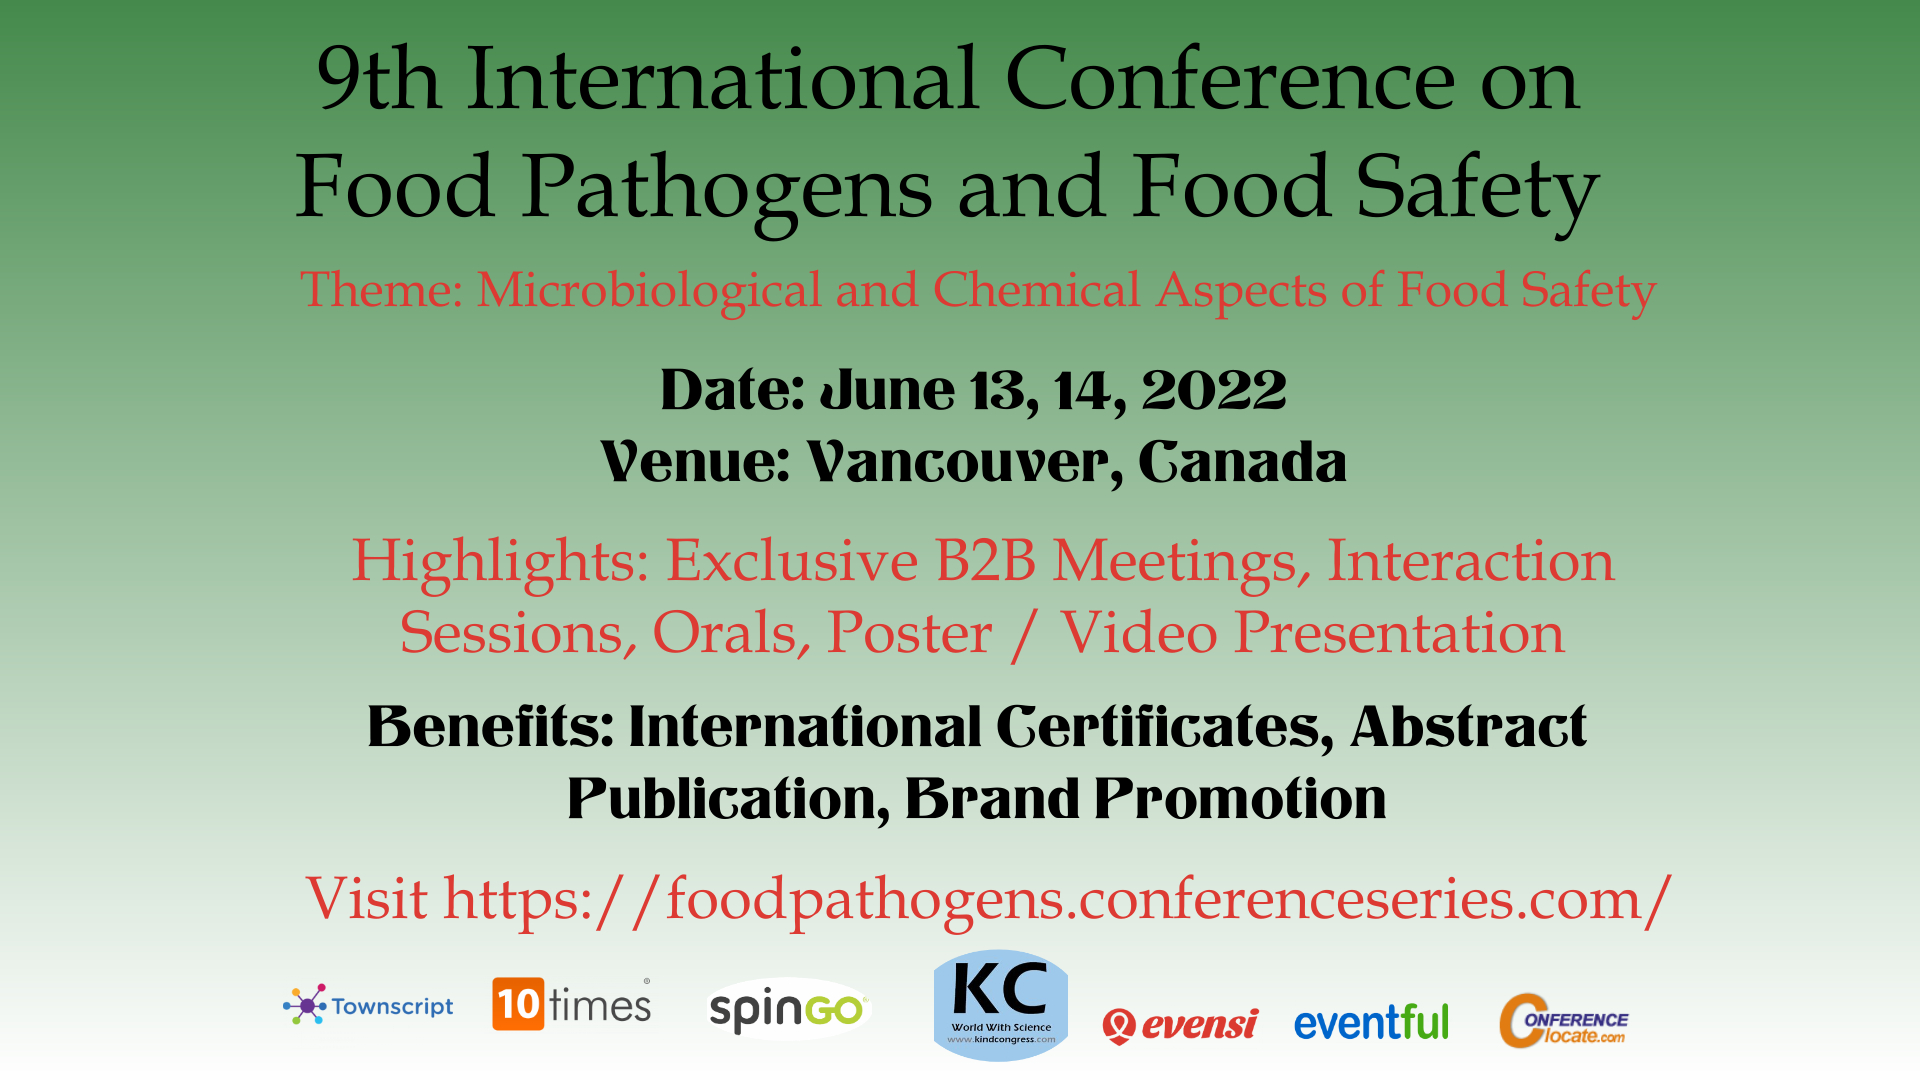 9th International Conference on Food pathogens and Food Safety Conference